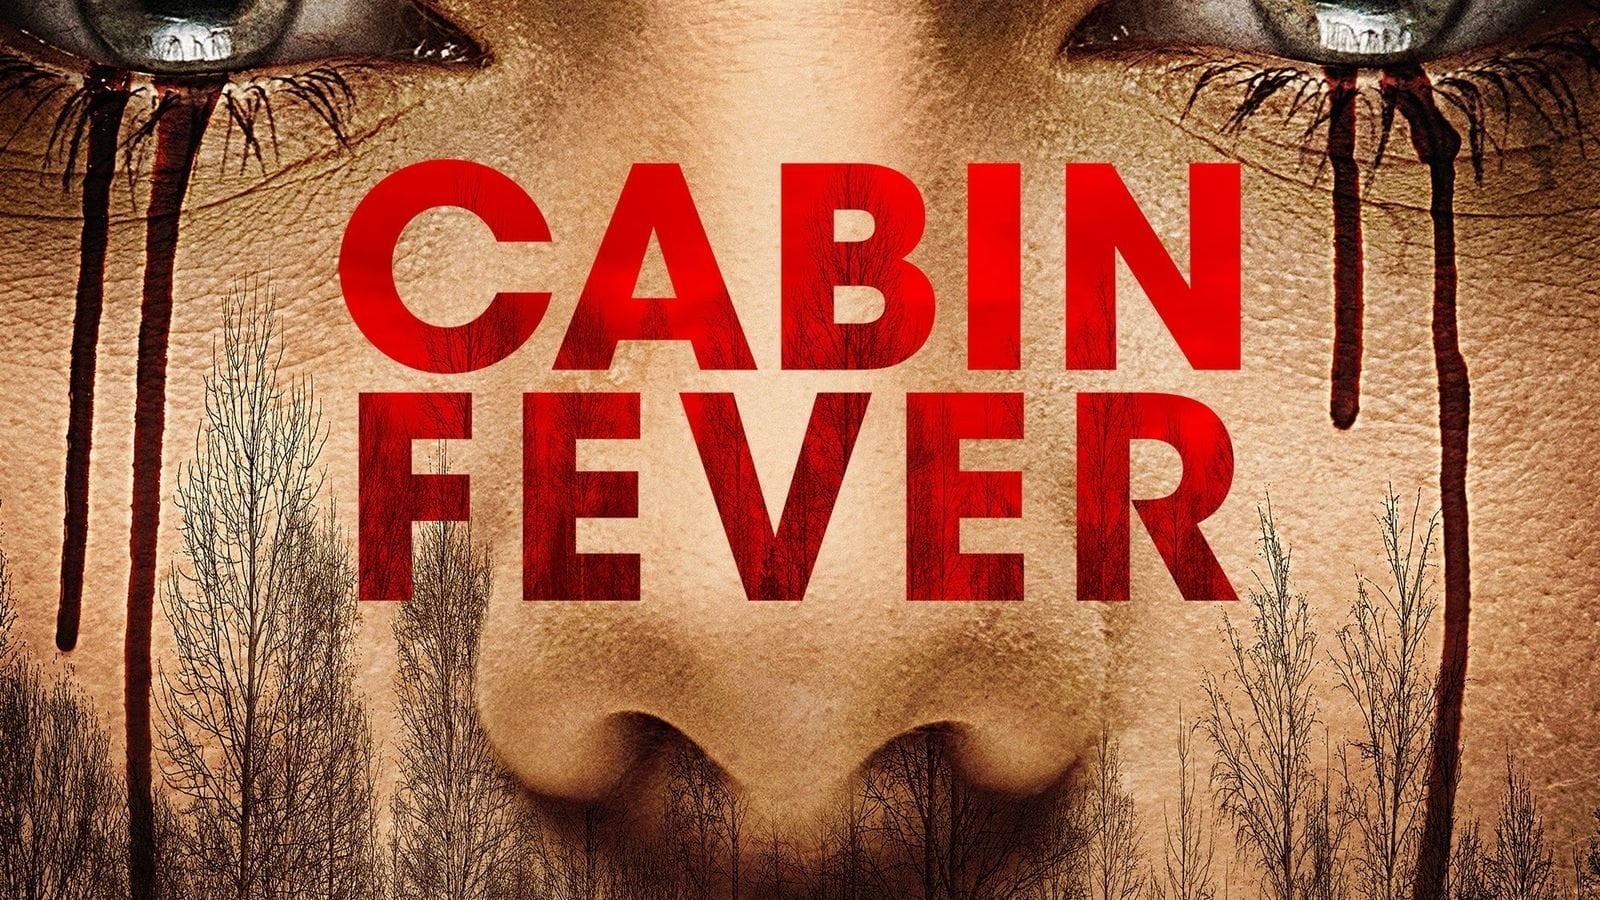 Cabin Fever 2016 123movies